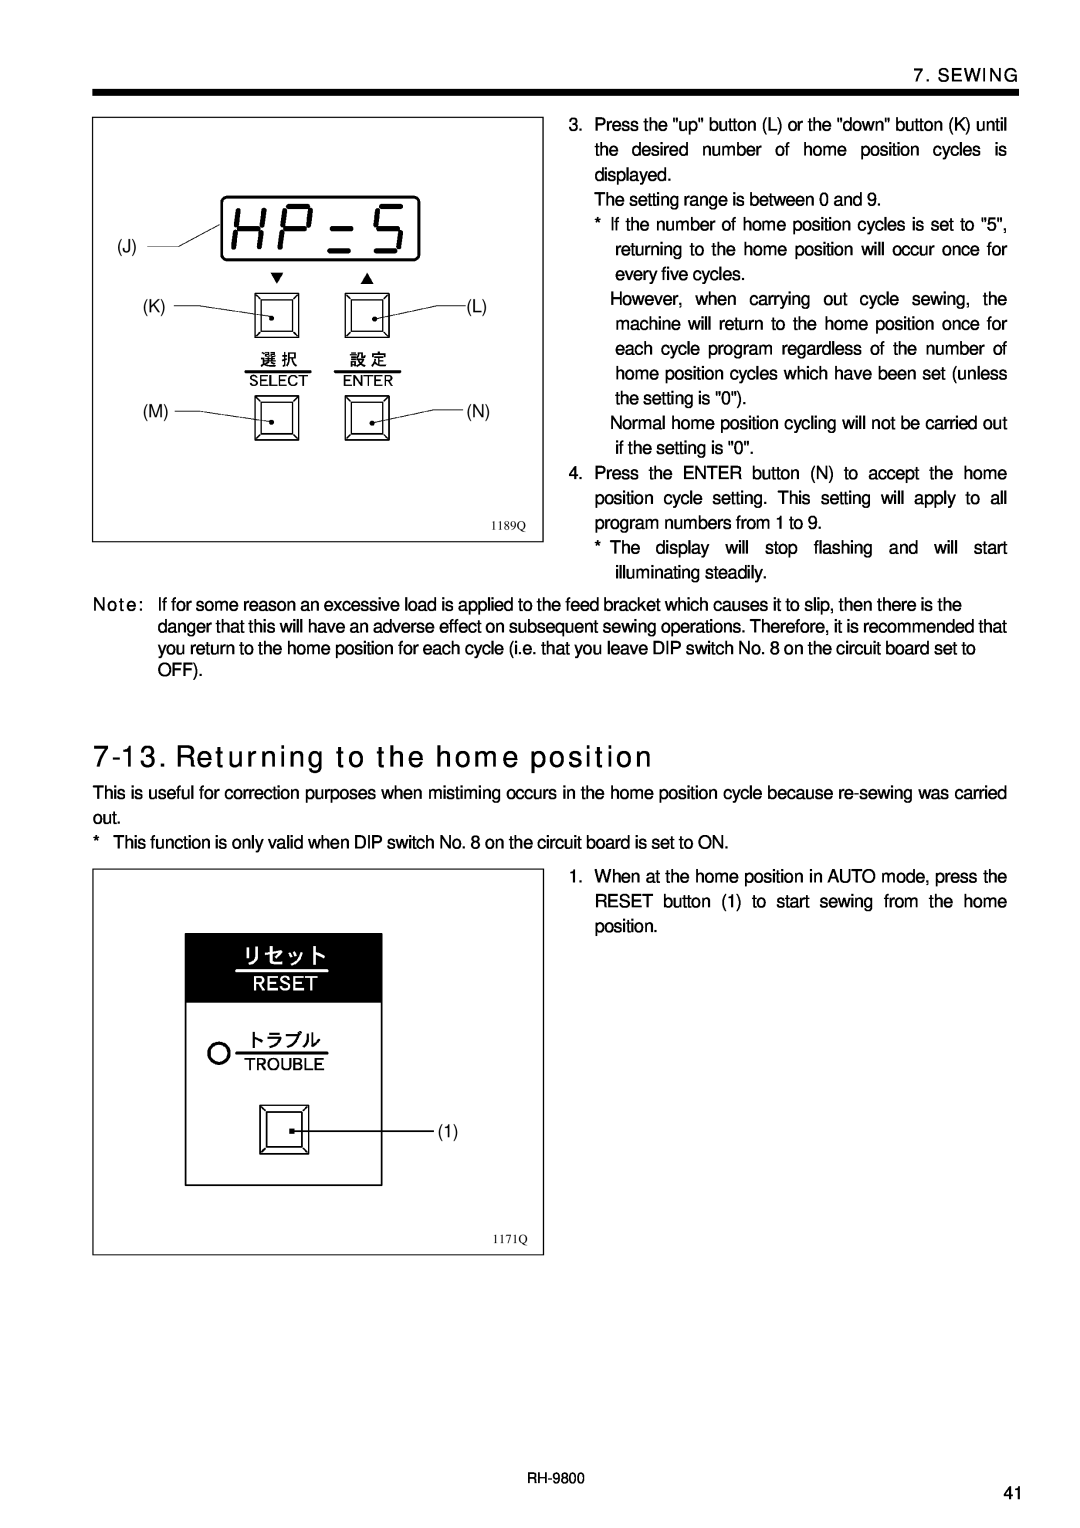 Brother DH4-B980 instruction manual Returning to the home position, Sewing, 1189Q, 1171Q 